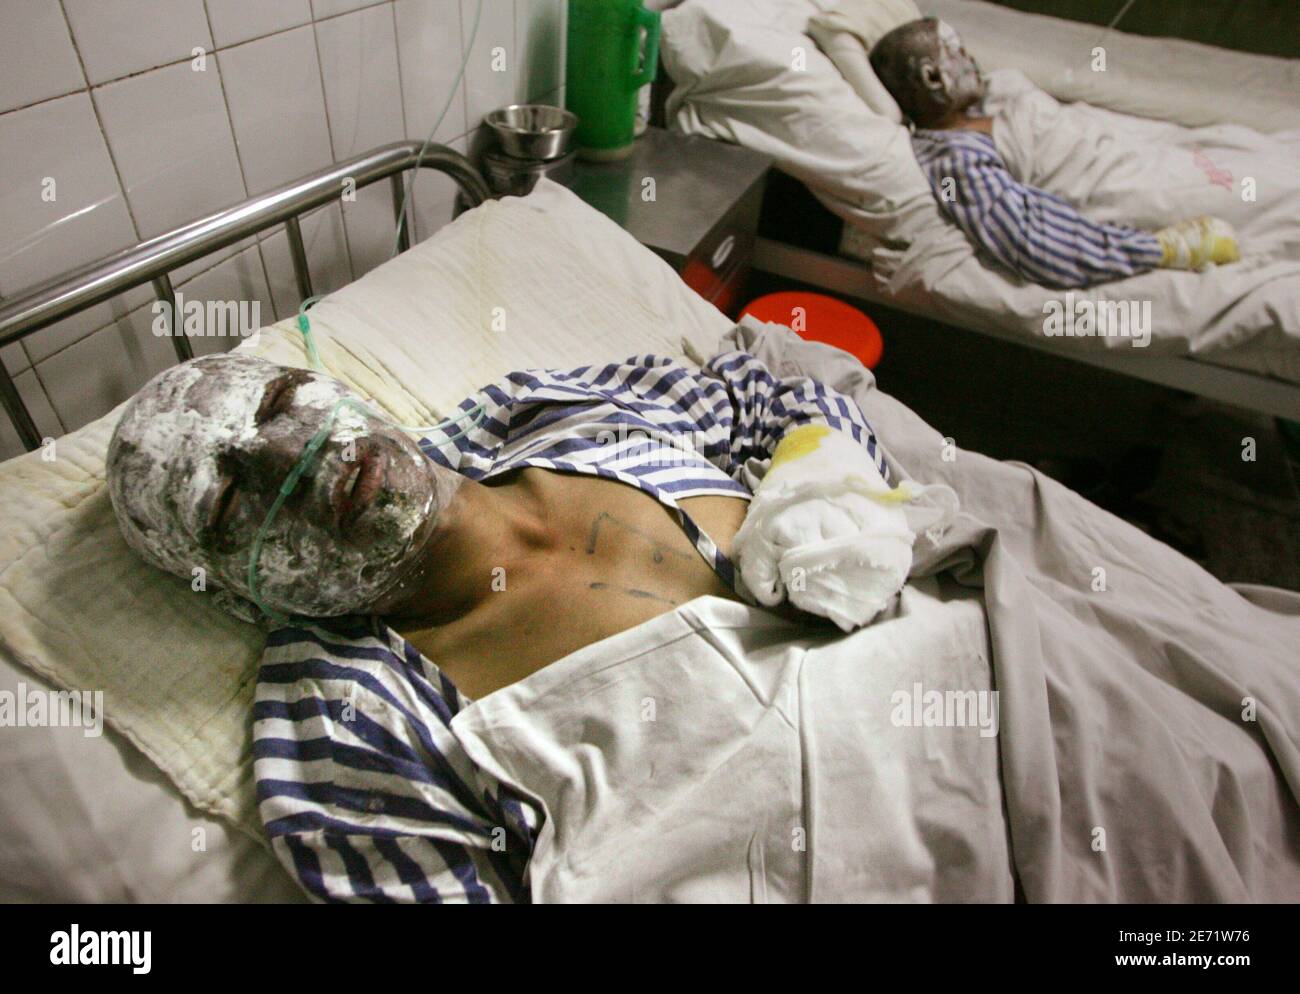 A survivor of a coal mine blast receives medical attention at a hospital after an explosion in Tangshan, China's Hebei province December 8, 2005. A gas explosion at a Chinese coal pit has killed at least 74 miners, state media said on Thursday, notching up another statistic in a grimly predictable series in the world's deadliest mining industry. Stock Photo